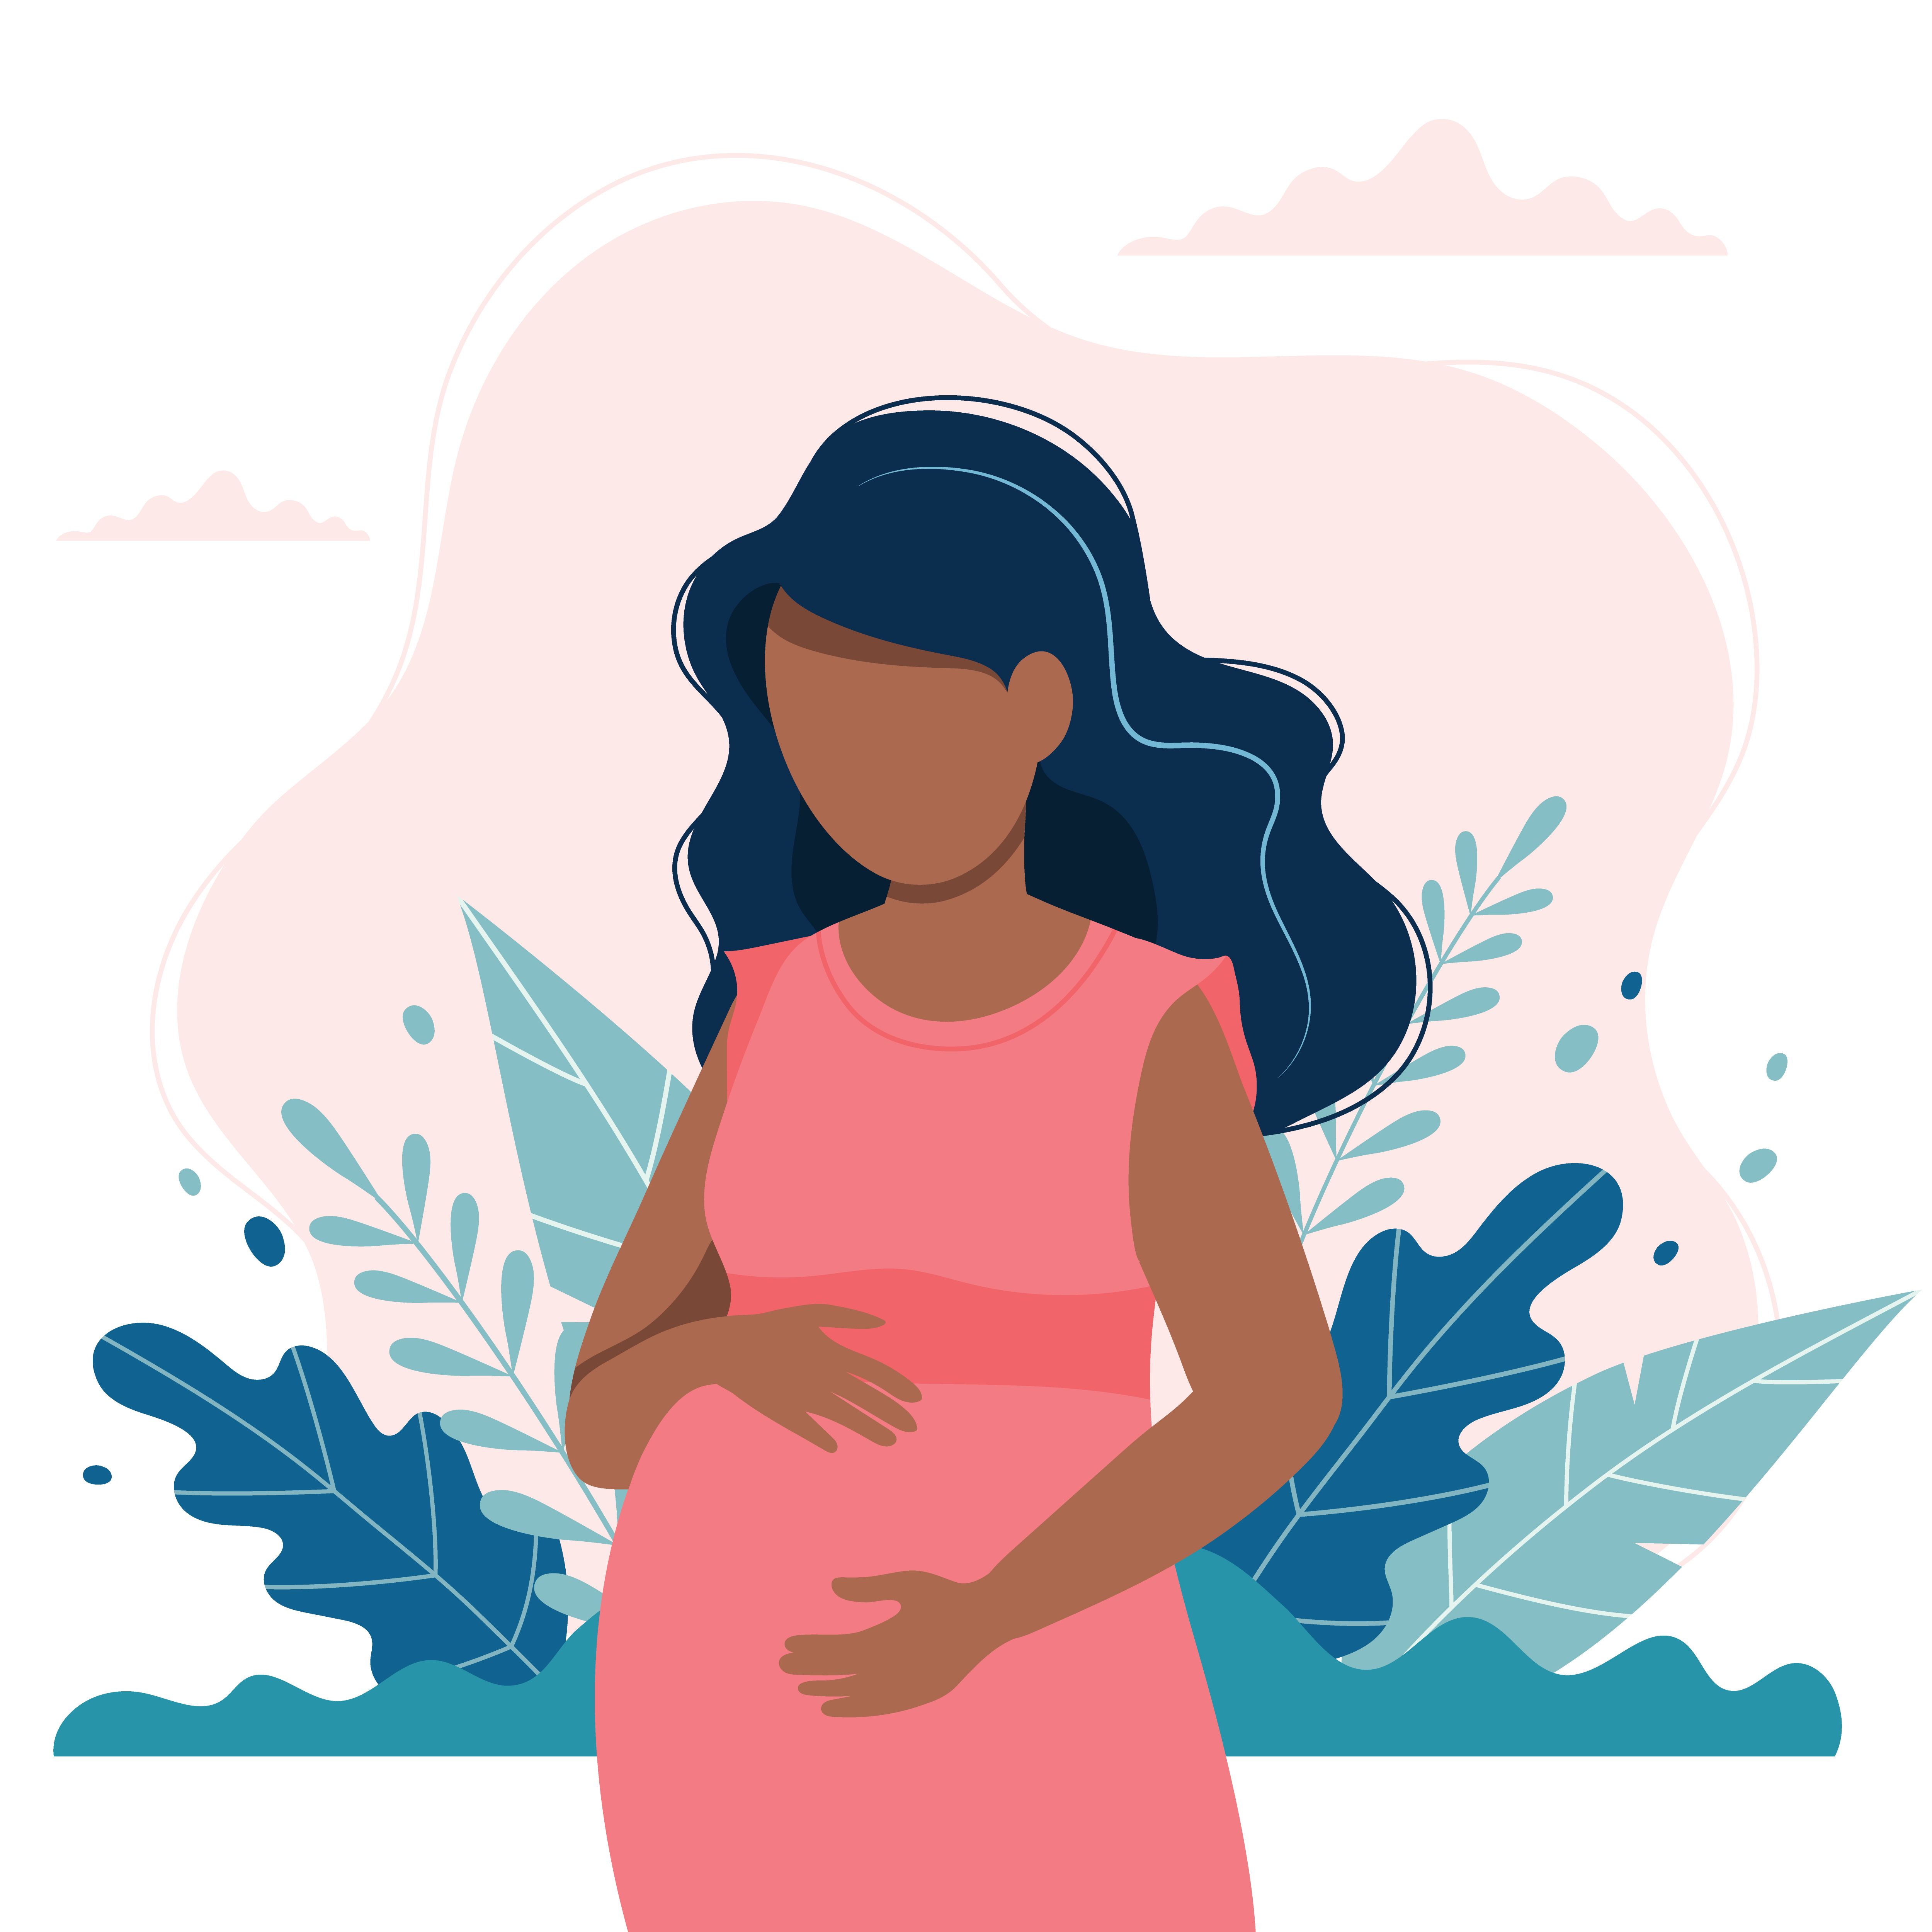 black pregnant woman with nature and leaves background concept vector illustration in flat style